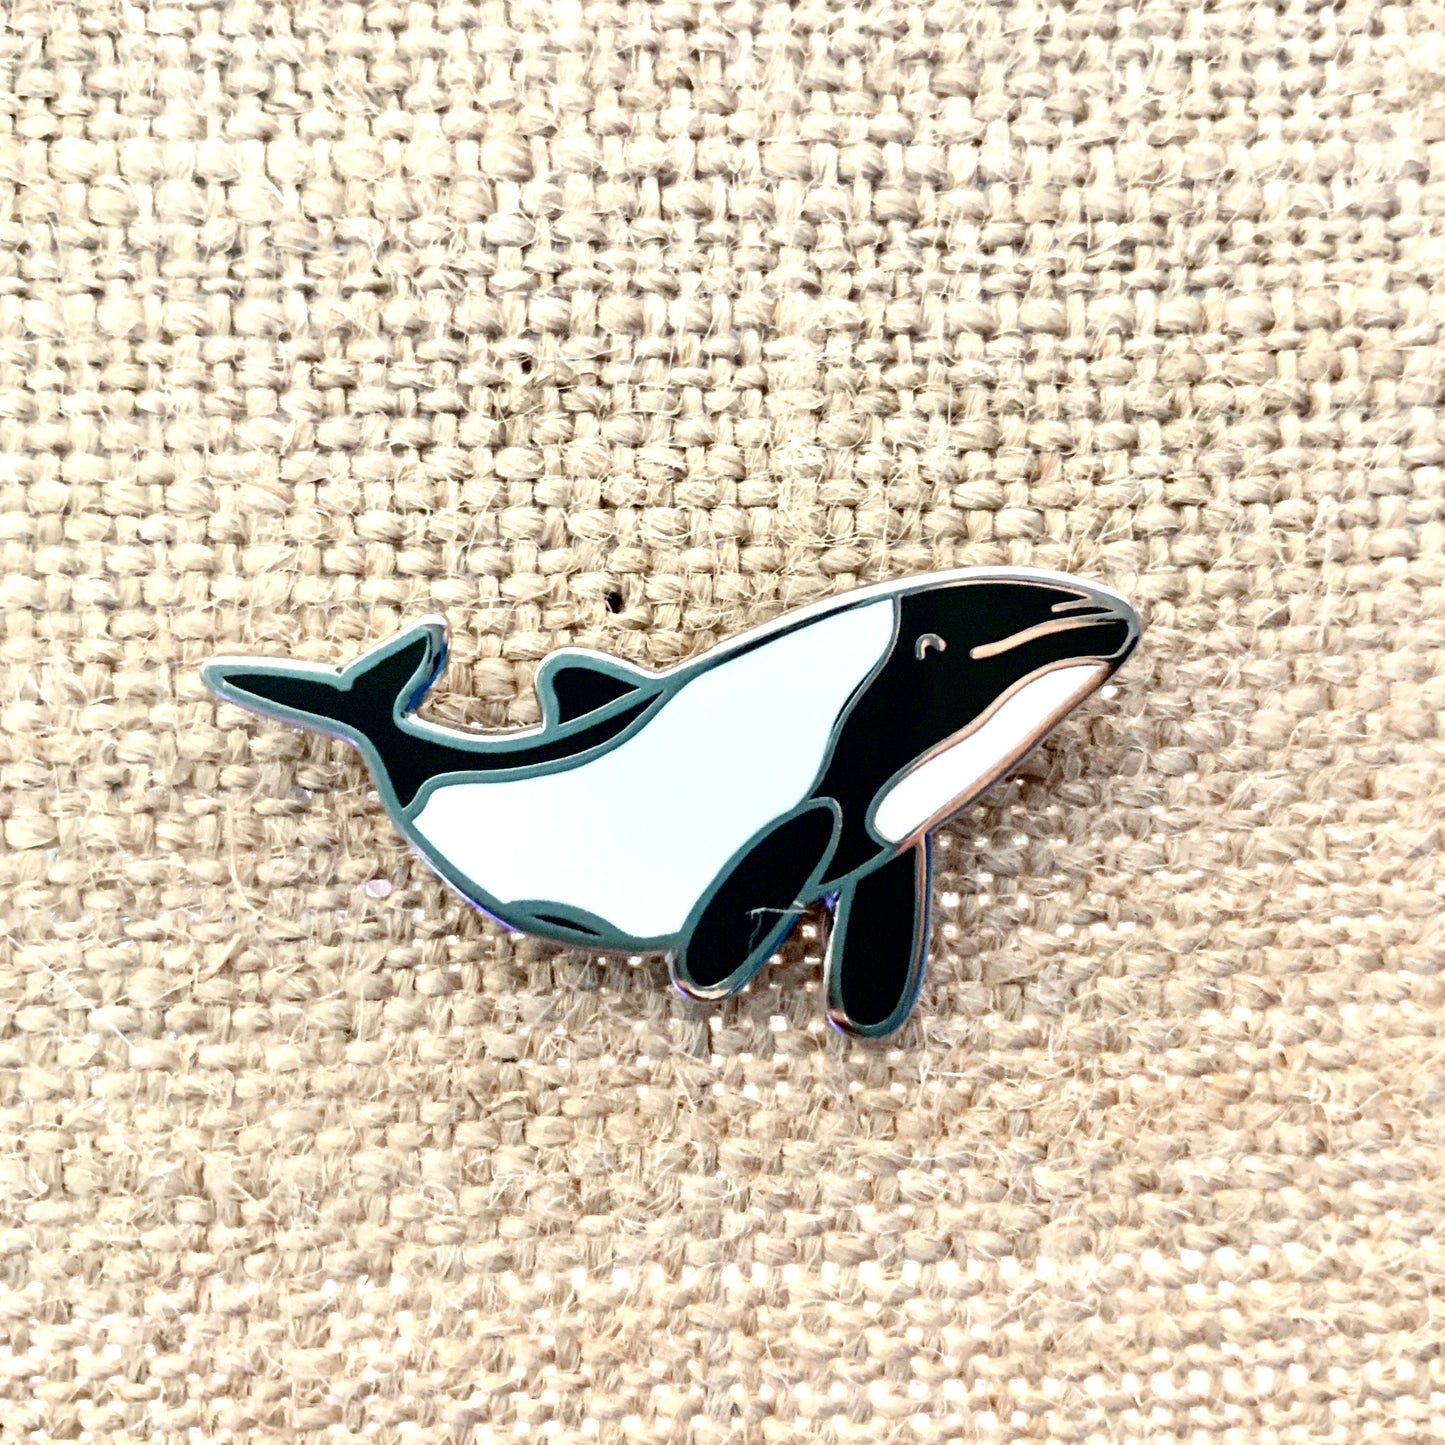 commerson’s dolphin cetacean pin